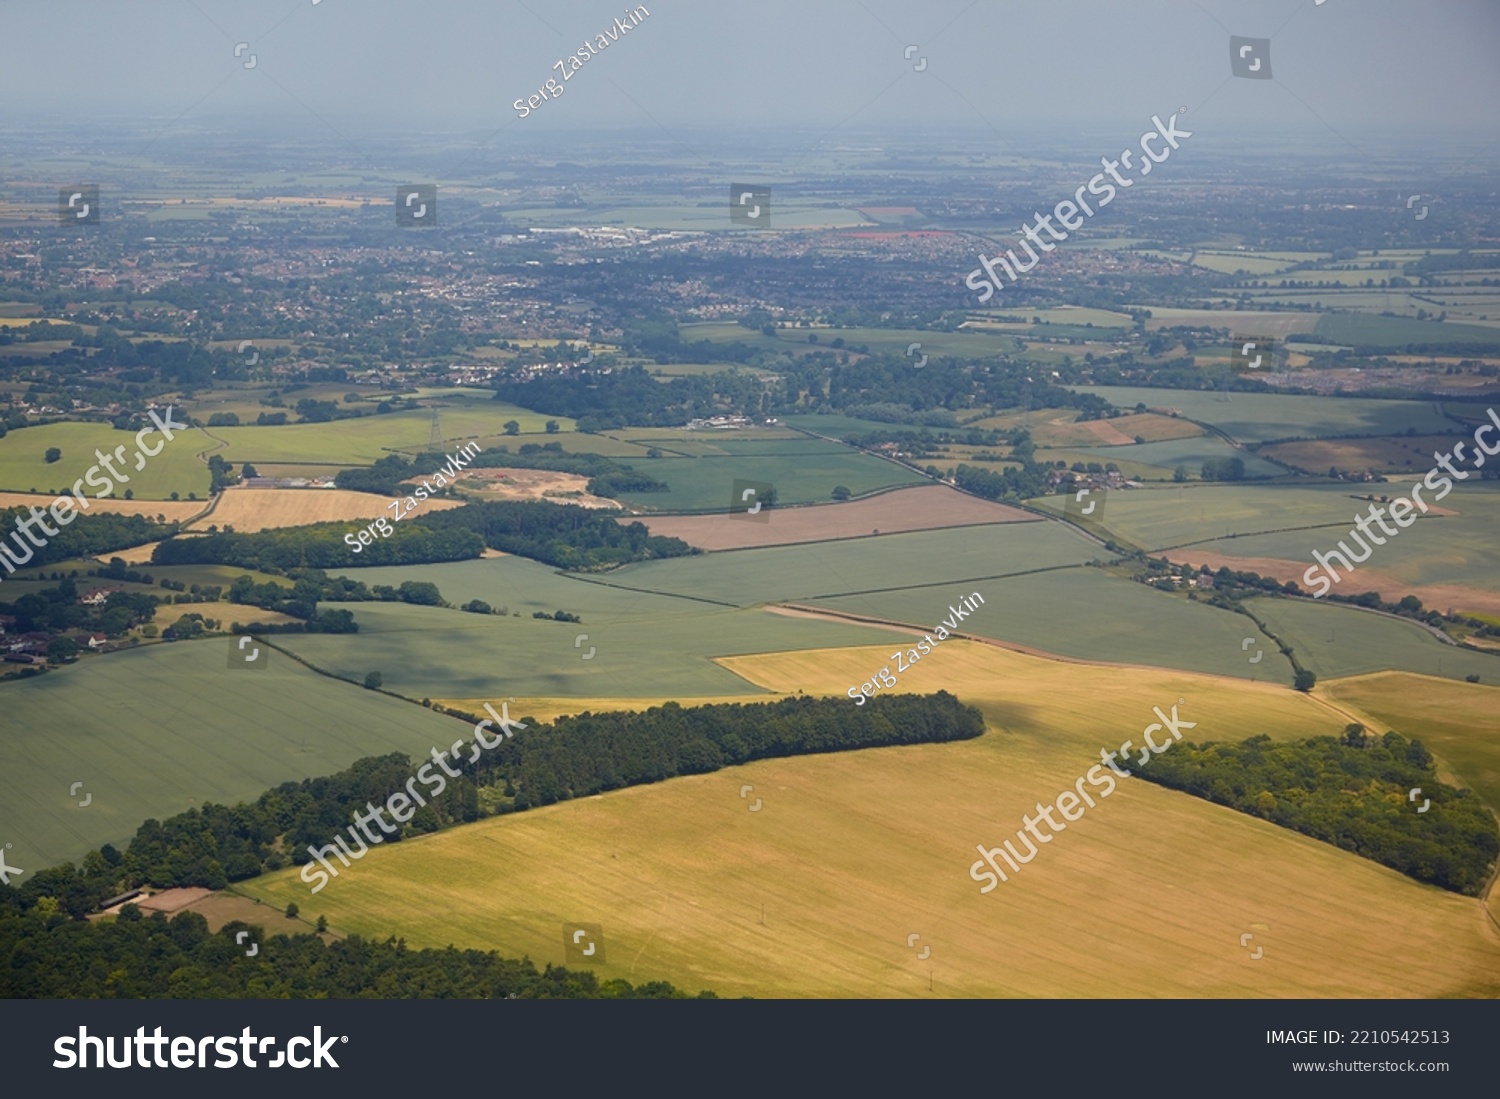 The aerial view of the fields and cousy settlements located in the lowlands surrounding county and university town of Cambridge. Cambridgeshire. United Kingdom #2210542513